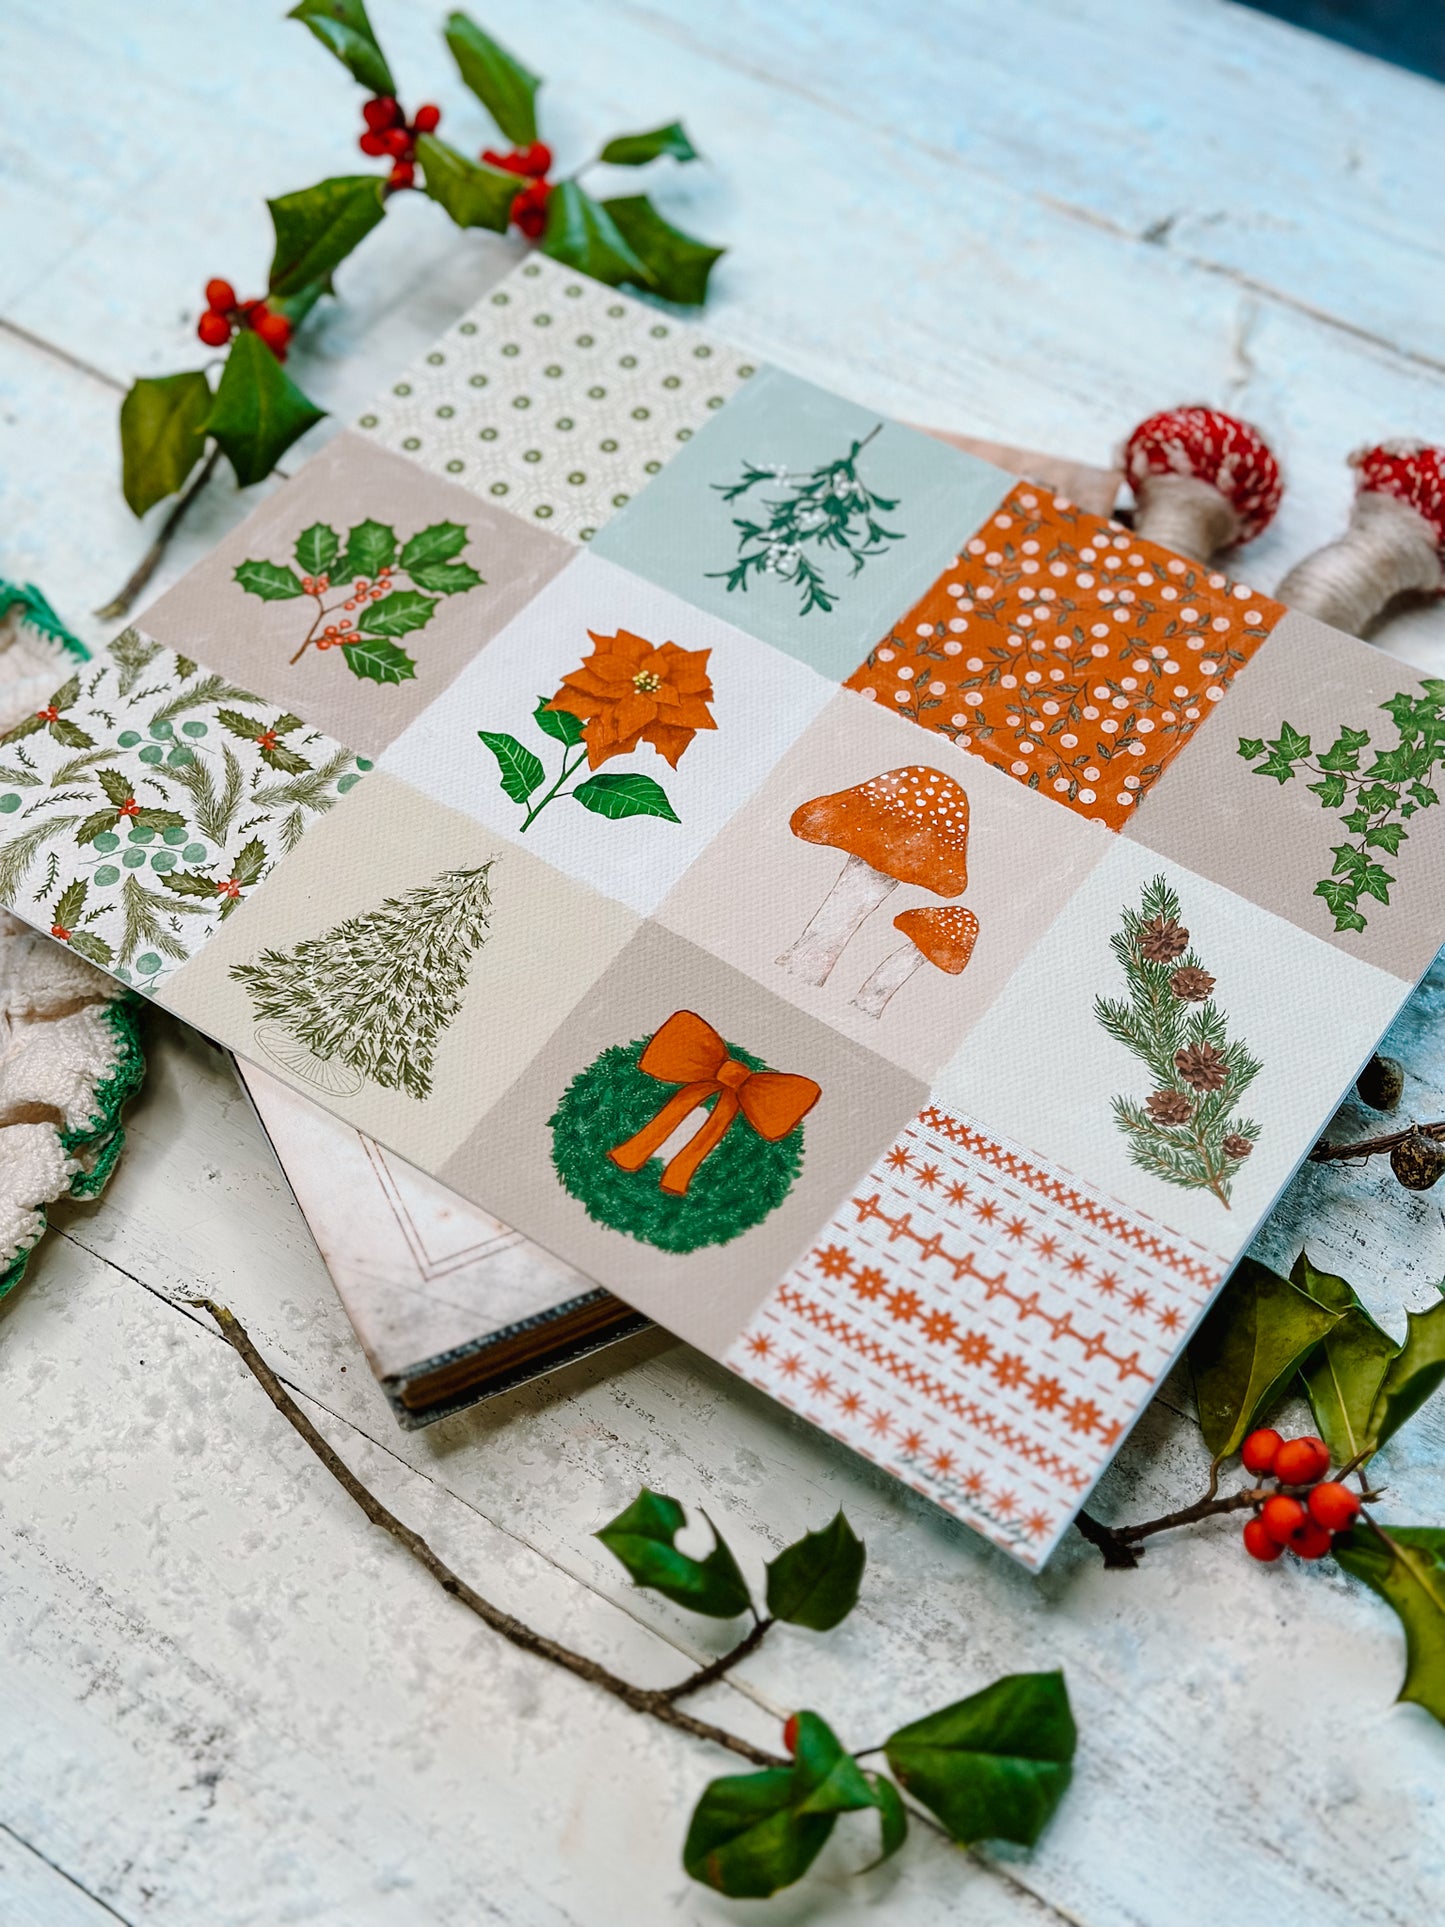 Woodsy Christmas Inspo Squares